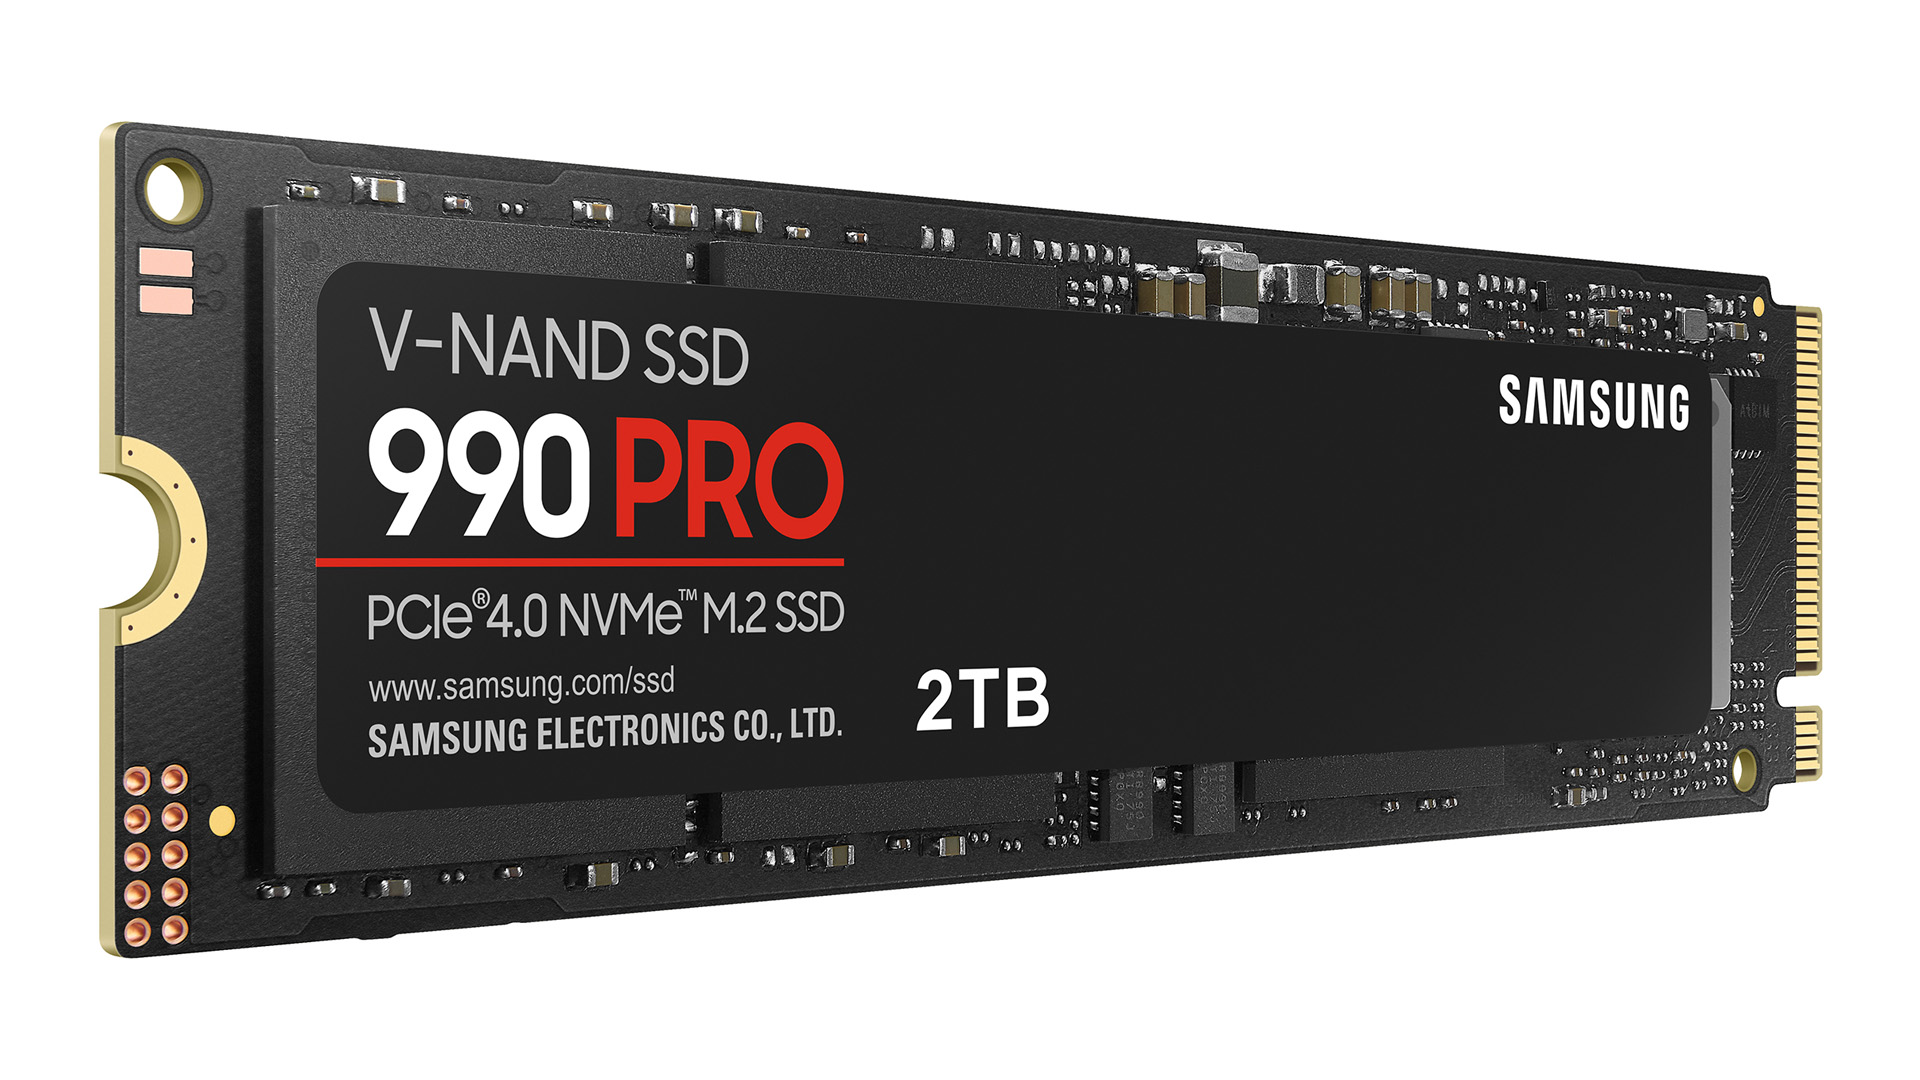 Samsung Introduces the 990 PRO SSD